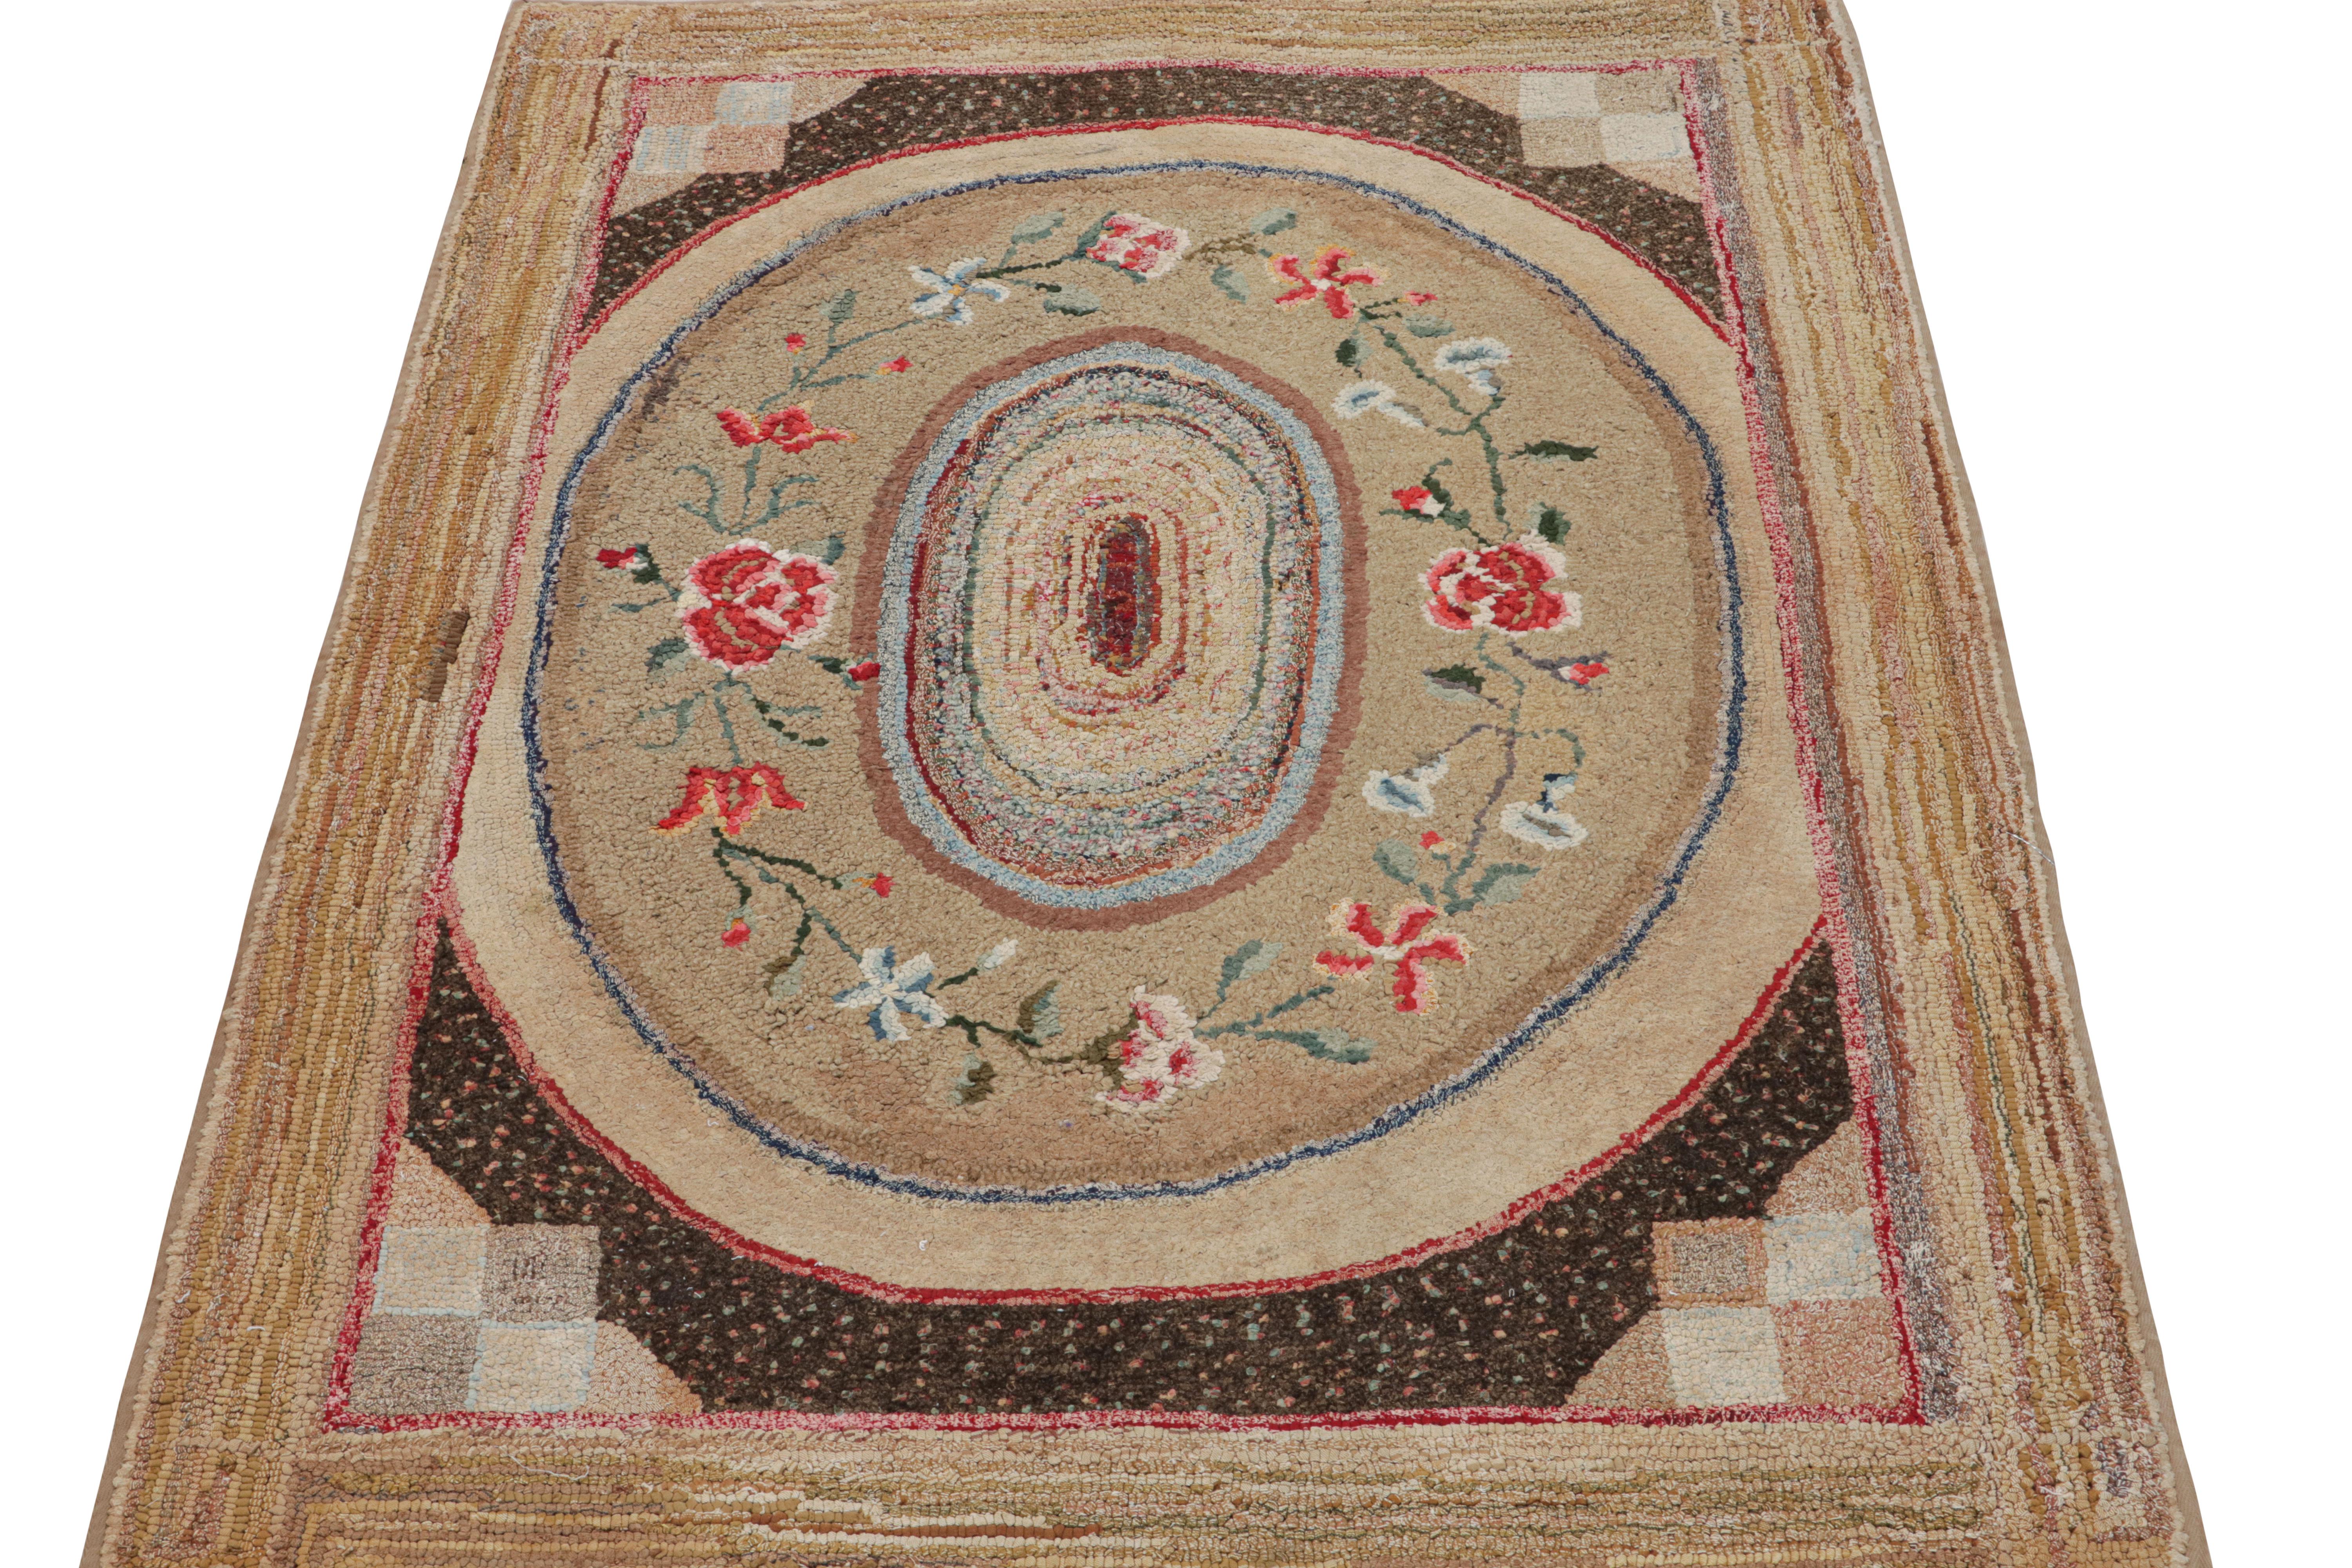 American Antique Hooked Rug in Brown, with Floral Patterns, from Rug & Kilim For Sale